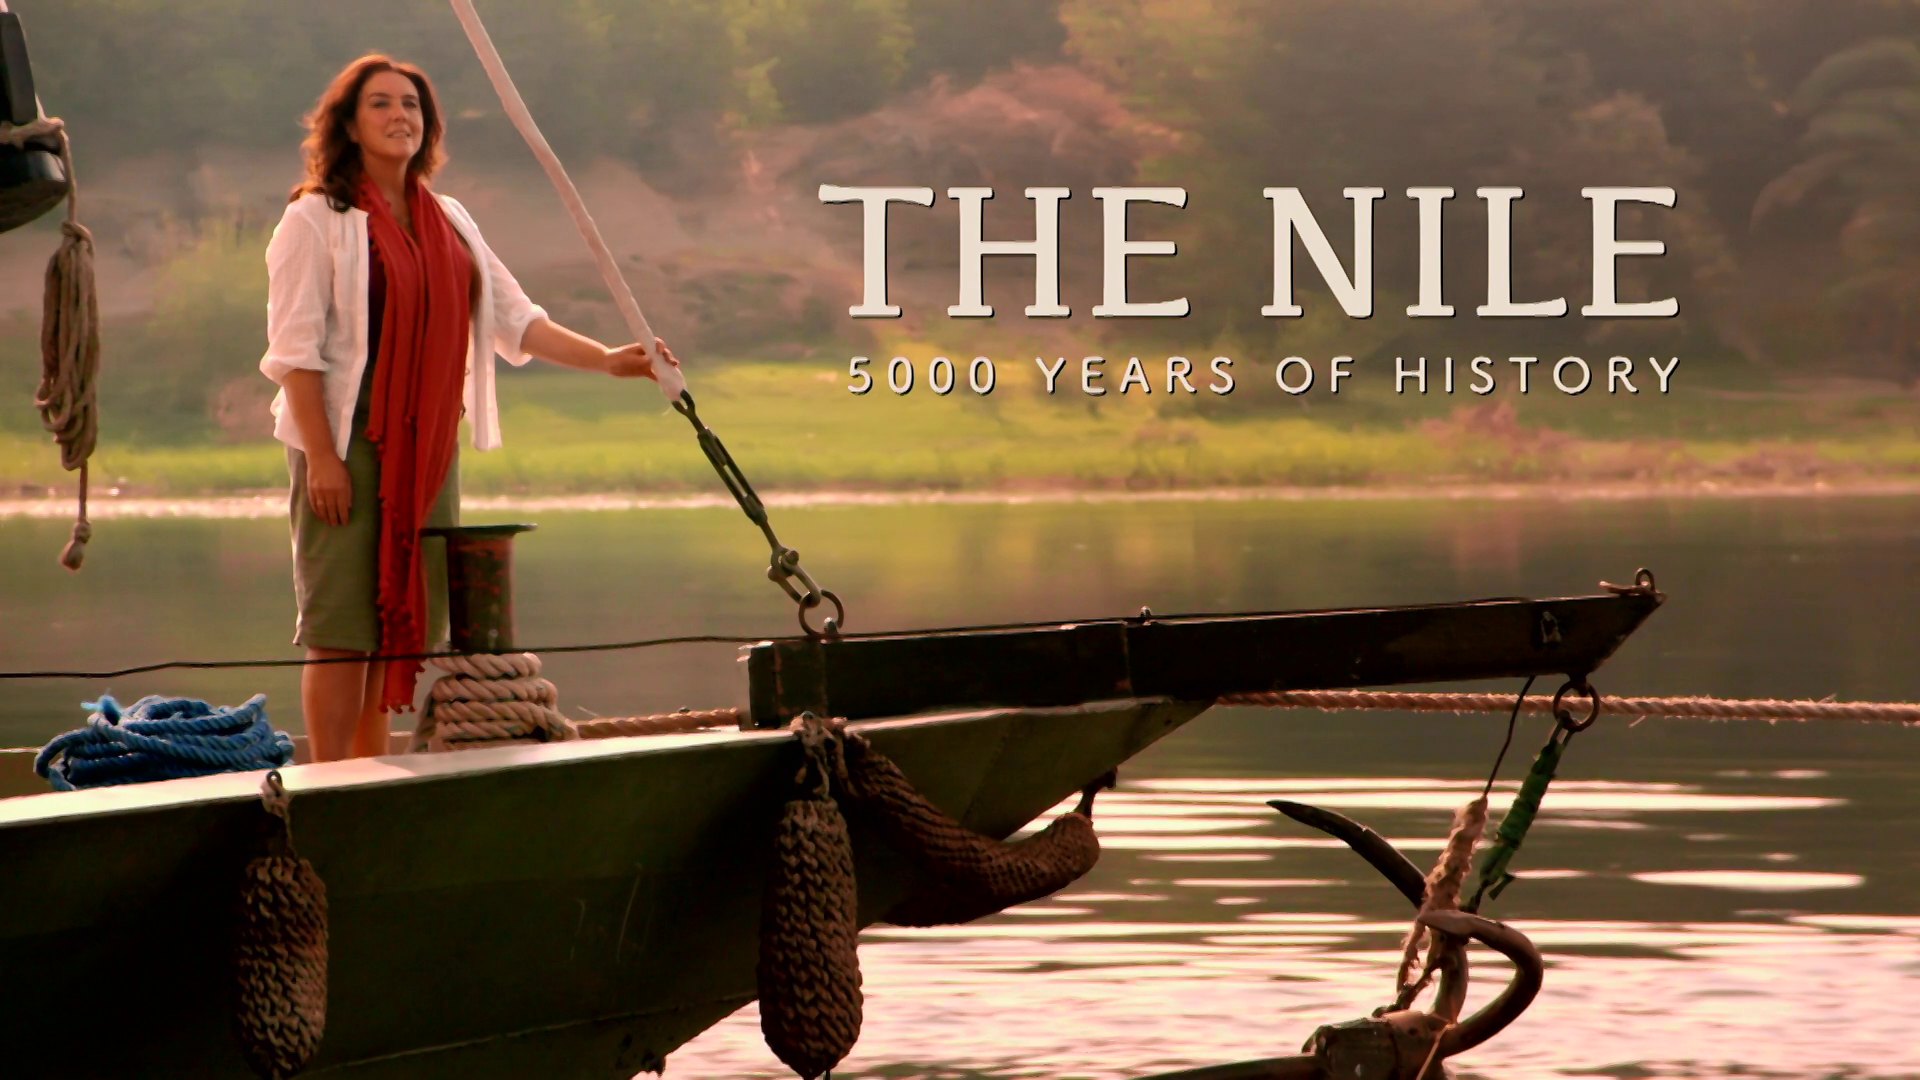 The Nile 5000 Years Of History S01E02 720p